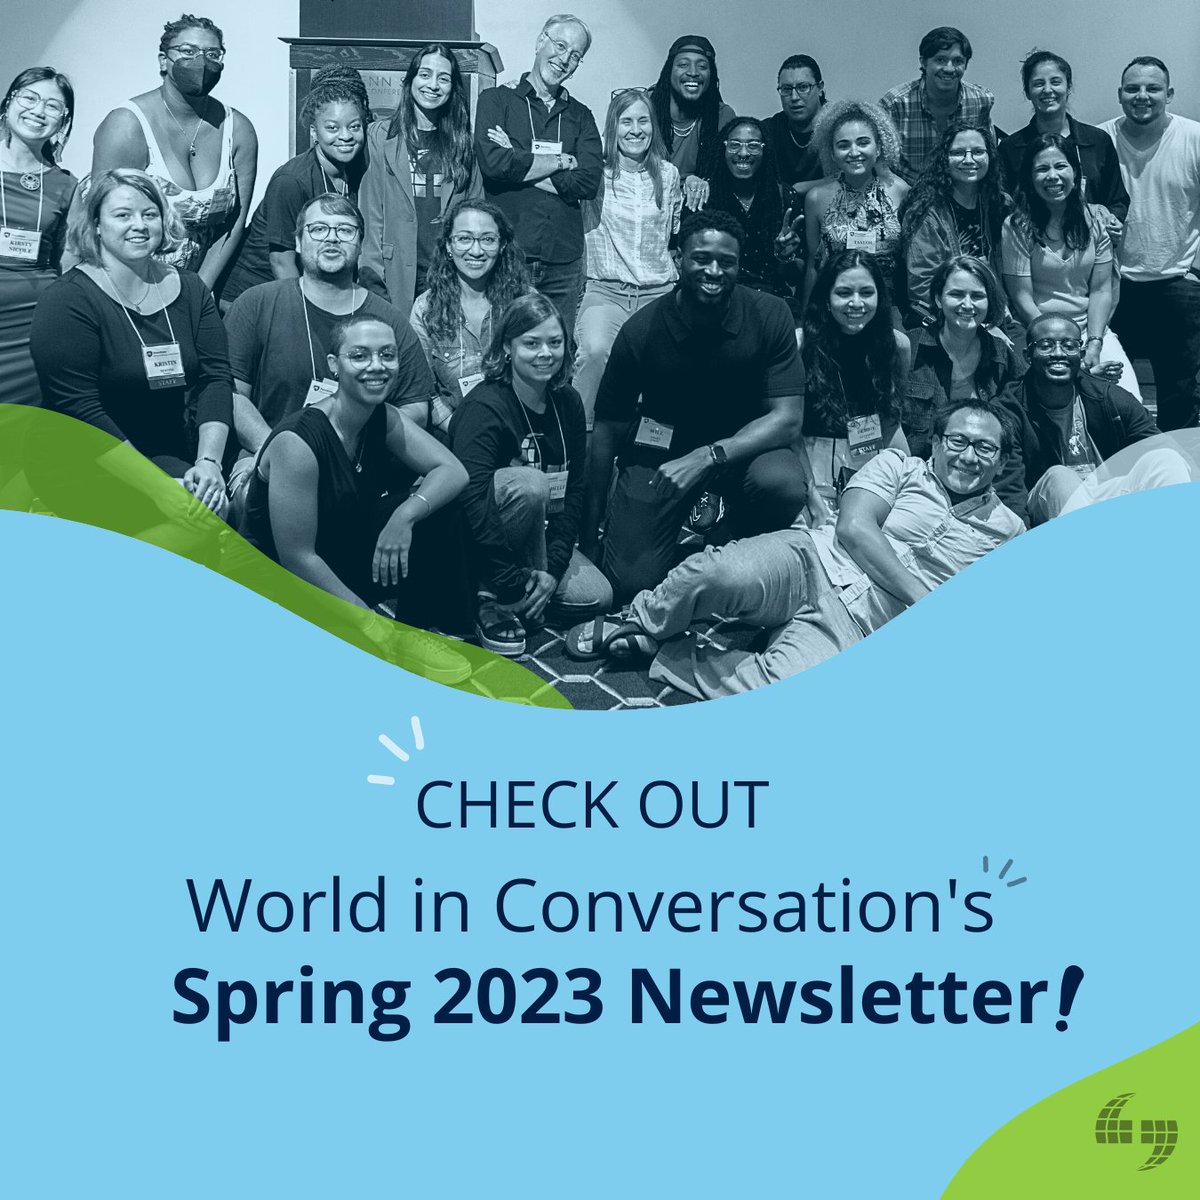 Read about our latest research, training and philanthropic endeavors in our spring newsletter at worldinconversation.org/alumni!  
#PennState #Alumni #LiberalArts #MyPennState #PSU2023  #CivilDiscourse #CrossBorders #CitizenDiplomacy #facilitation #WorldinConversation #WinC